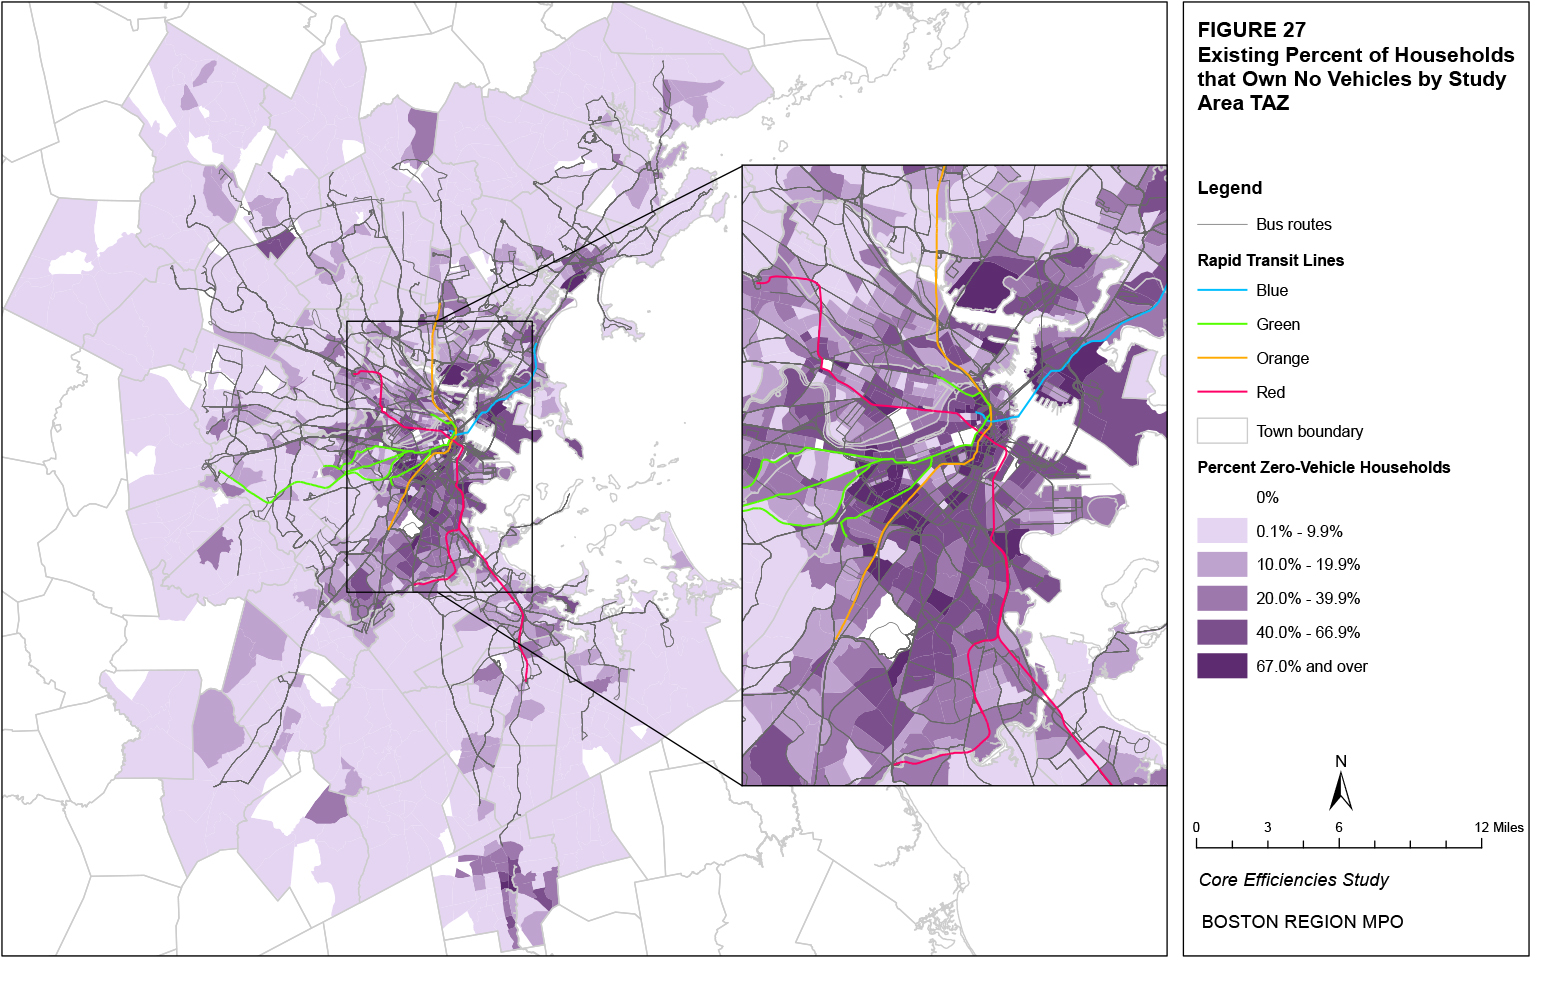 This map shows the existing percent of households that own no vehicles by TAZ.